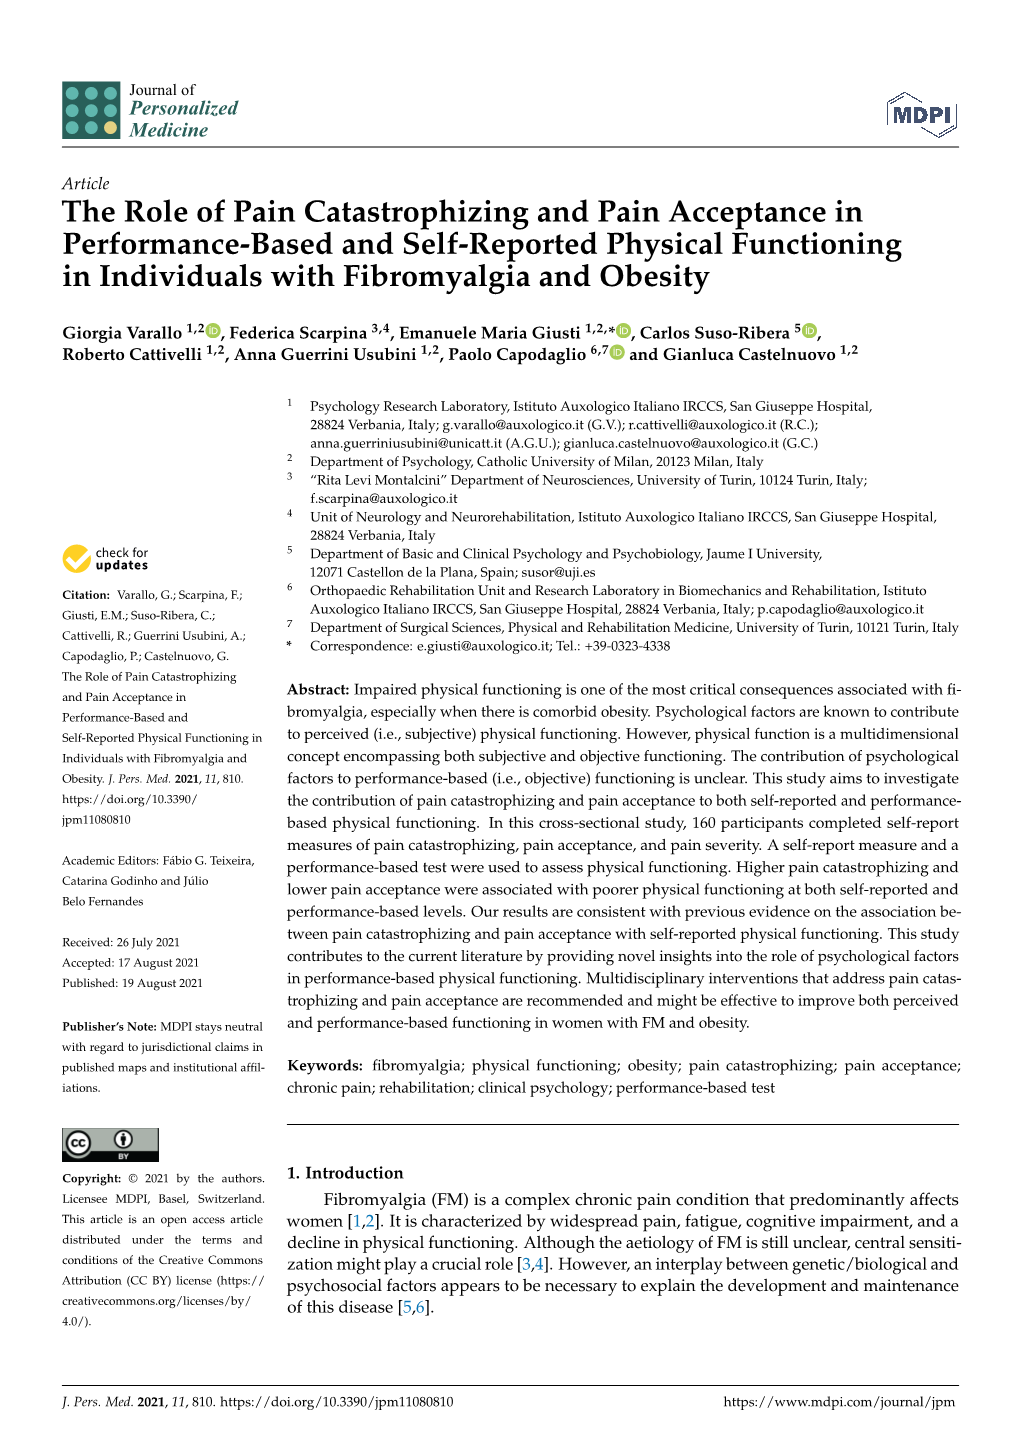 The Role of Pain Catastrophizing and Pain Acceptance in Performance-Based and Self-Reported Physical Functioning in Individuals with Fibromyalgia and Obesity